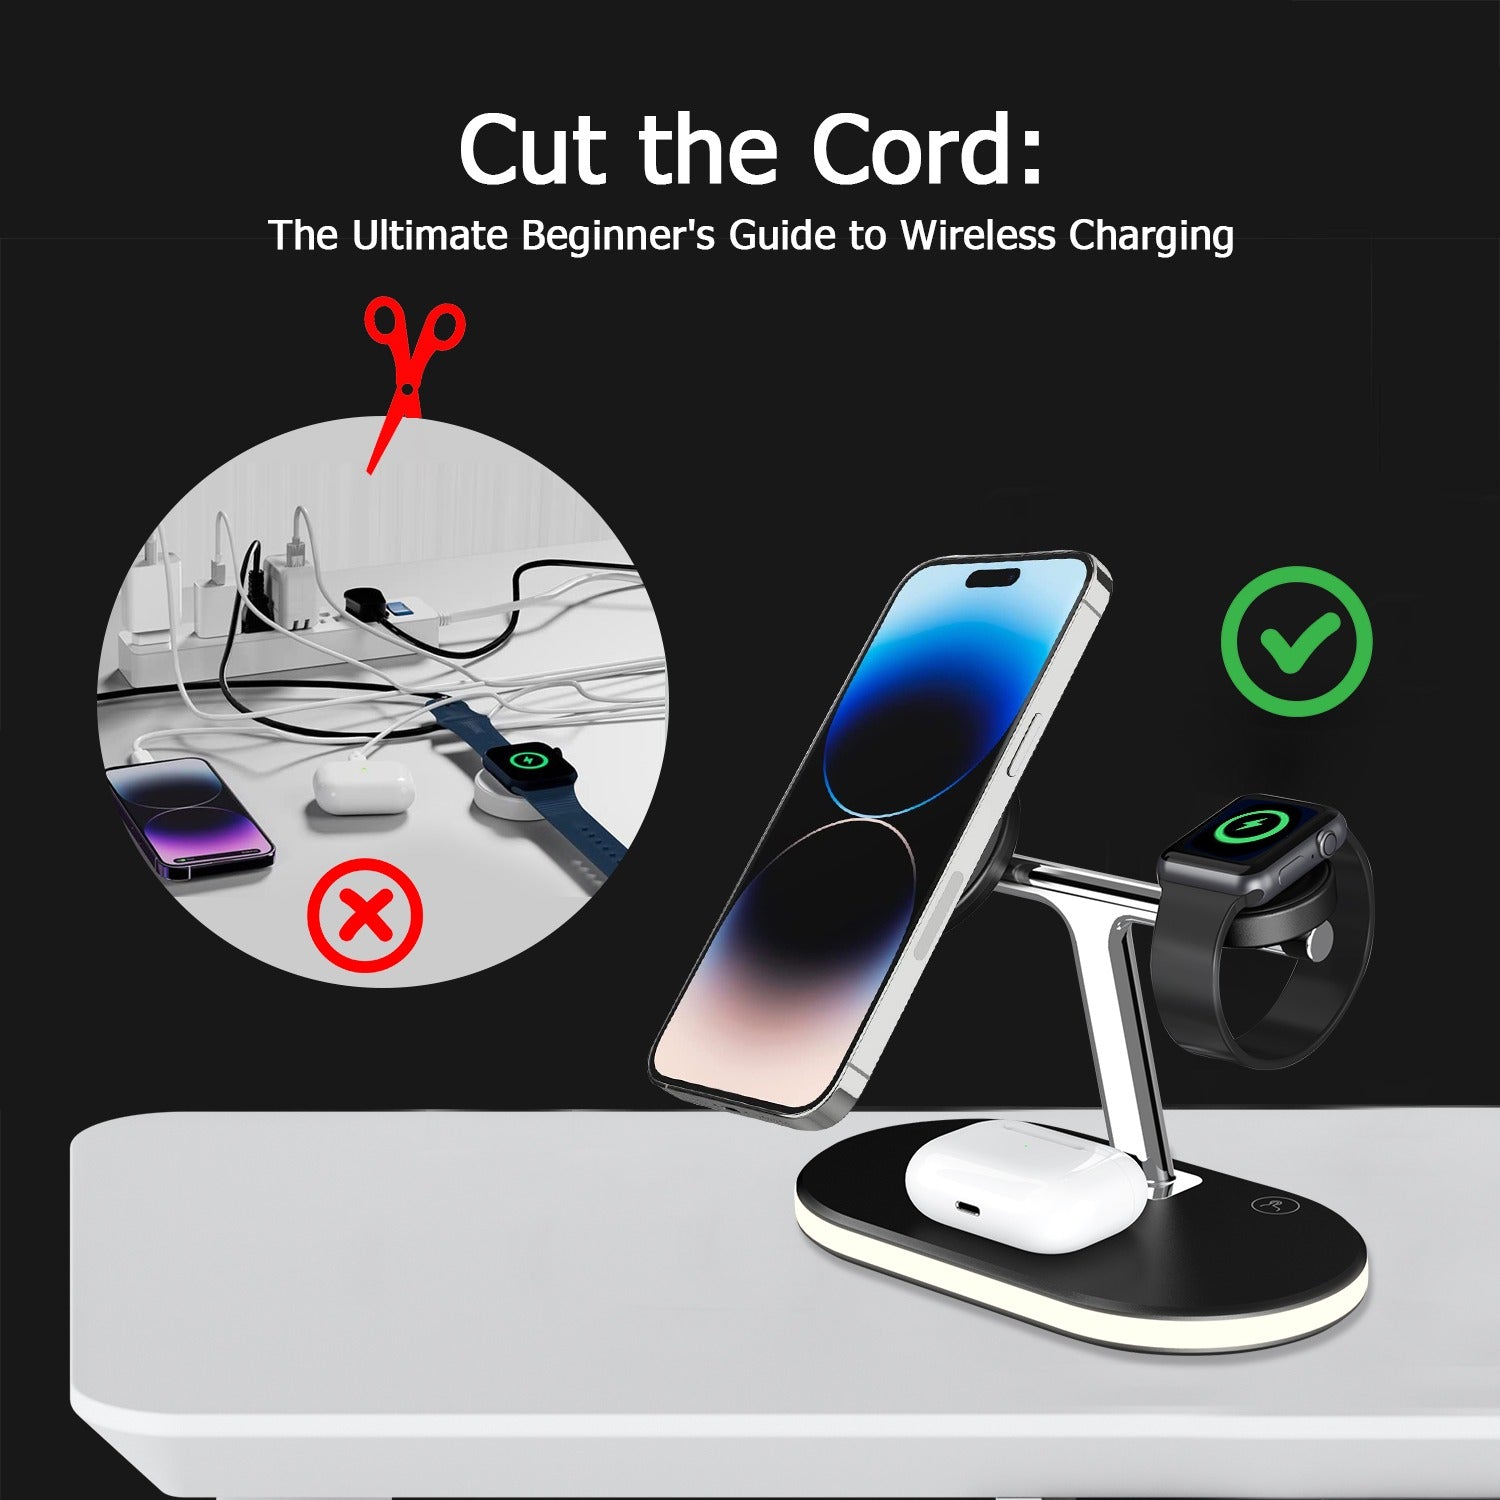 Cut the Cord: The Ultimate Beginner's Guide to Wireless Charging